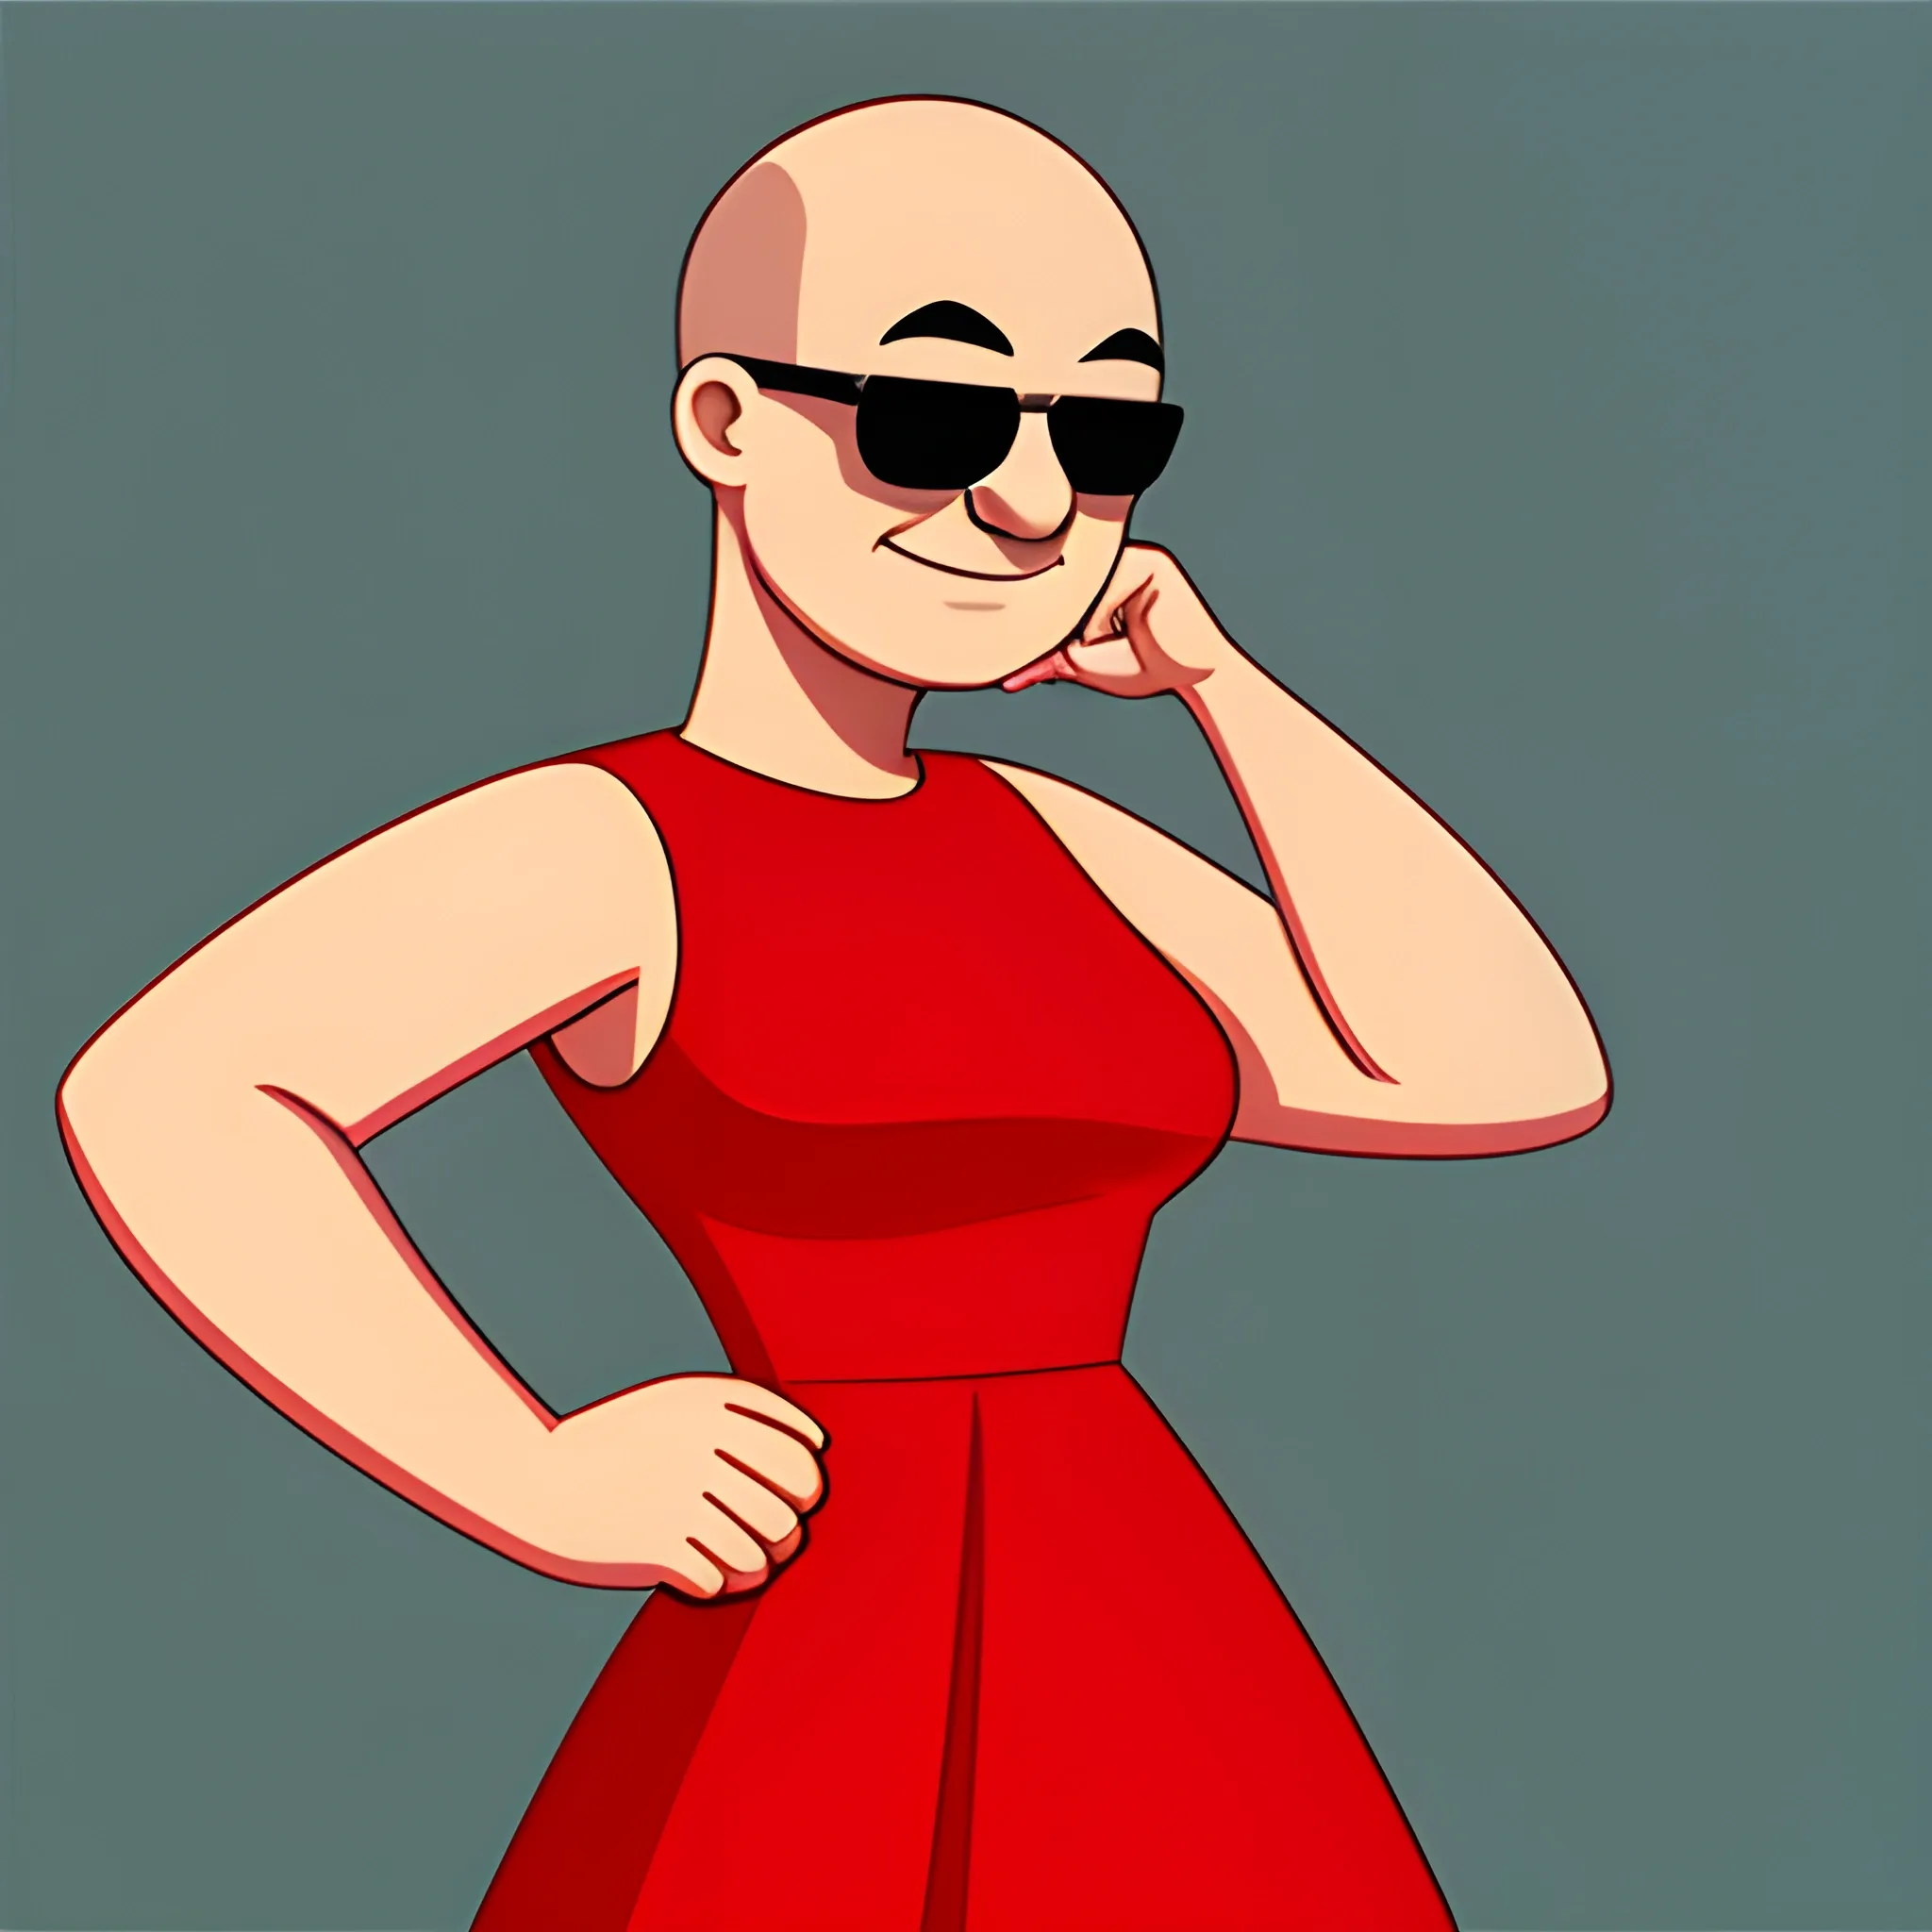 , Cartoon bald guy with sunglasses in a womens red dress